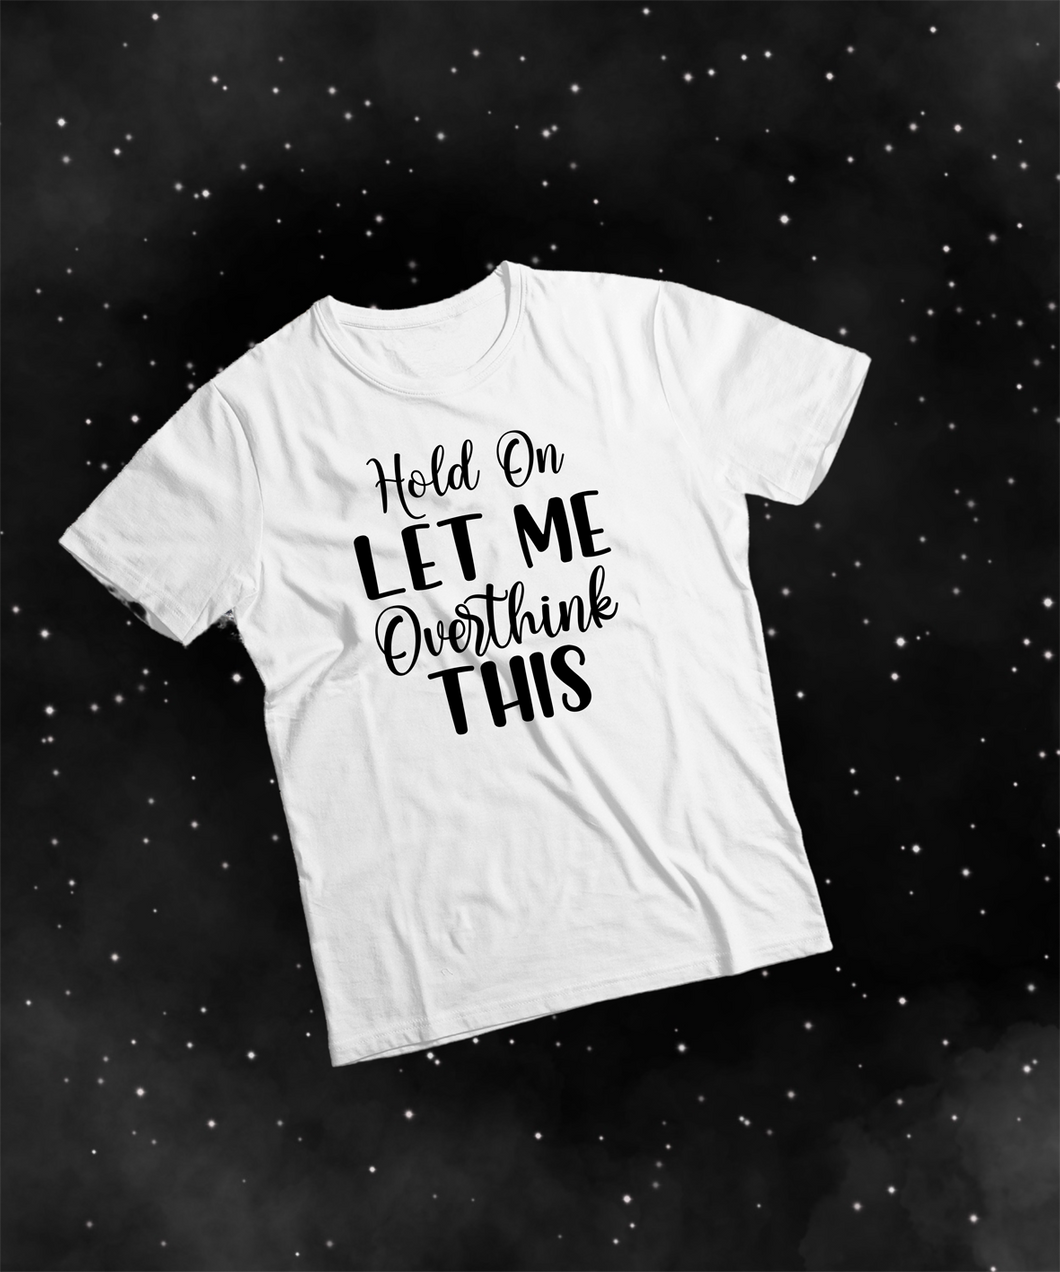 Sarcastic Delight: Wear Your Words with a Wink & Sarcasm, Sarcastic Design T-shirts